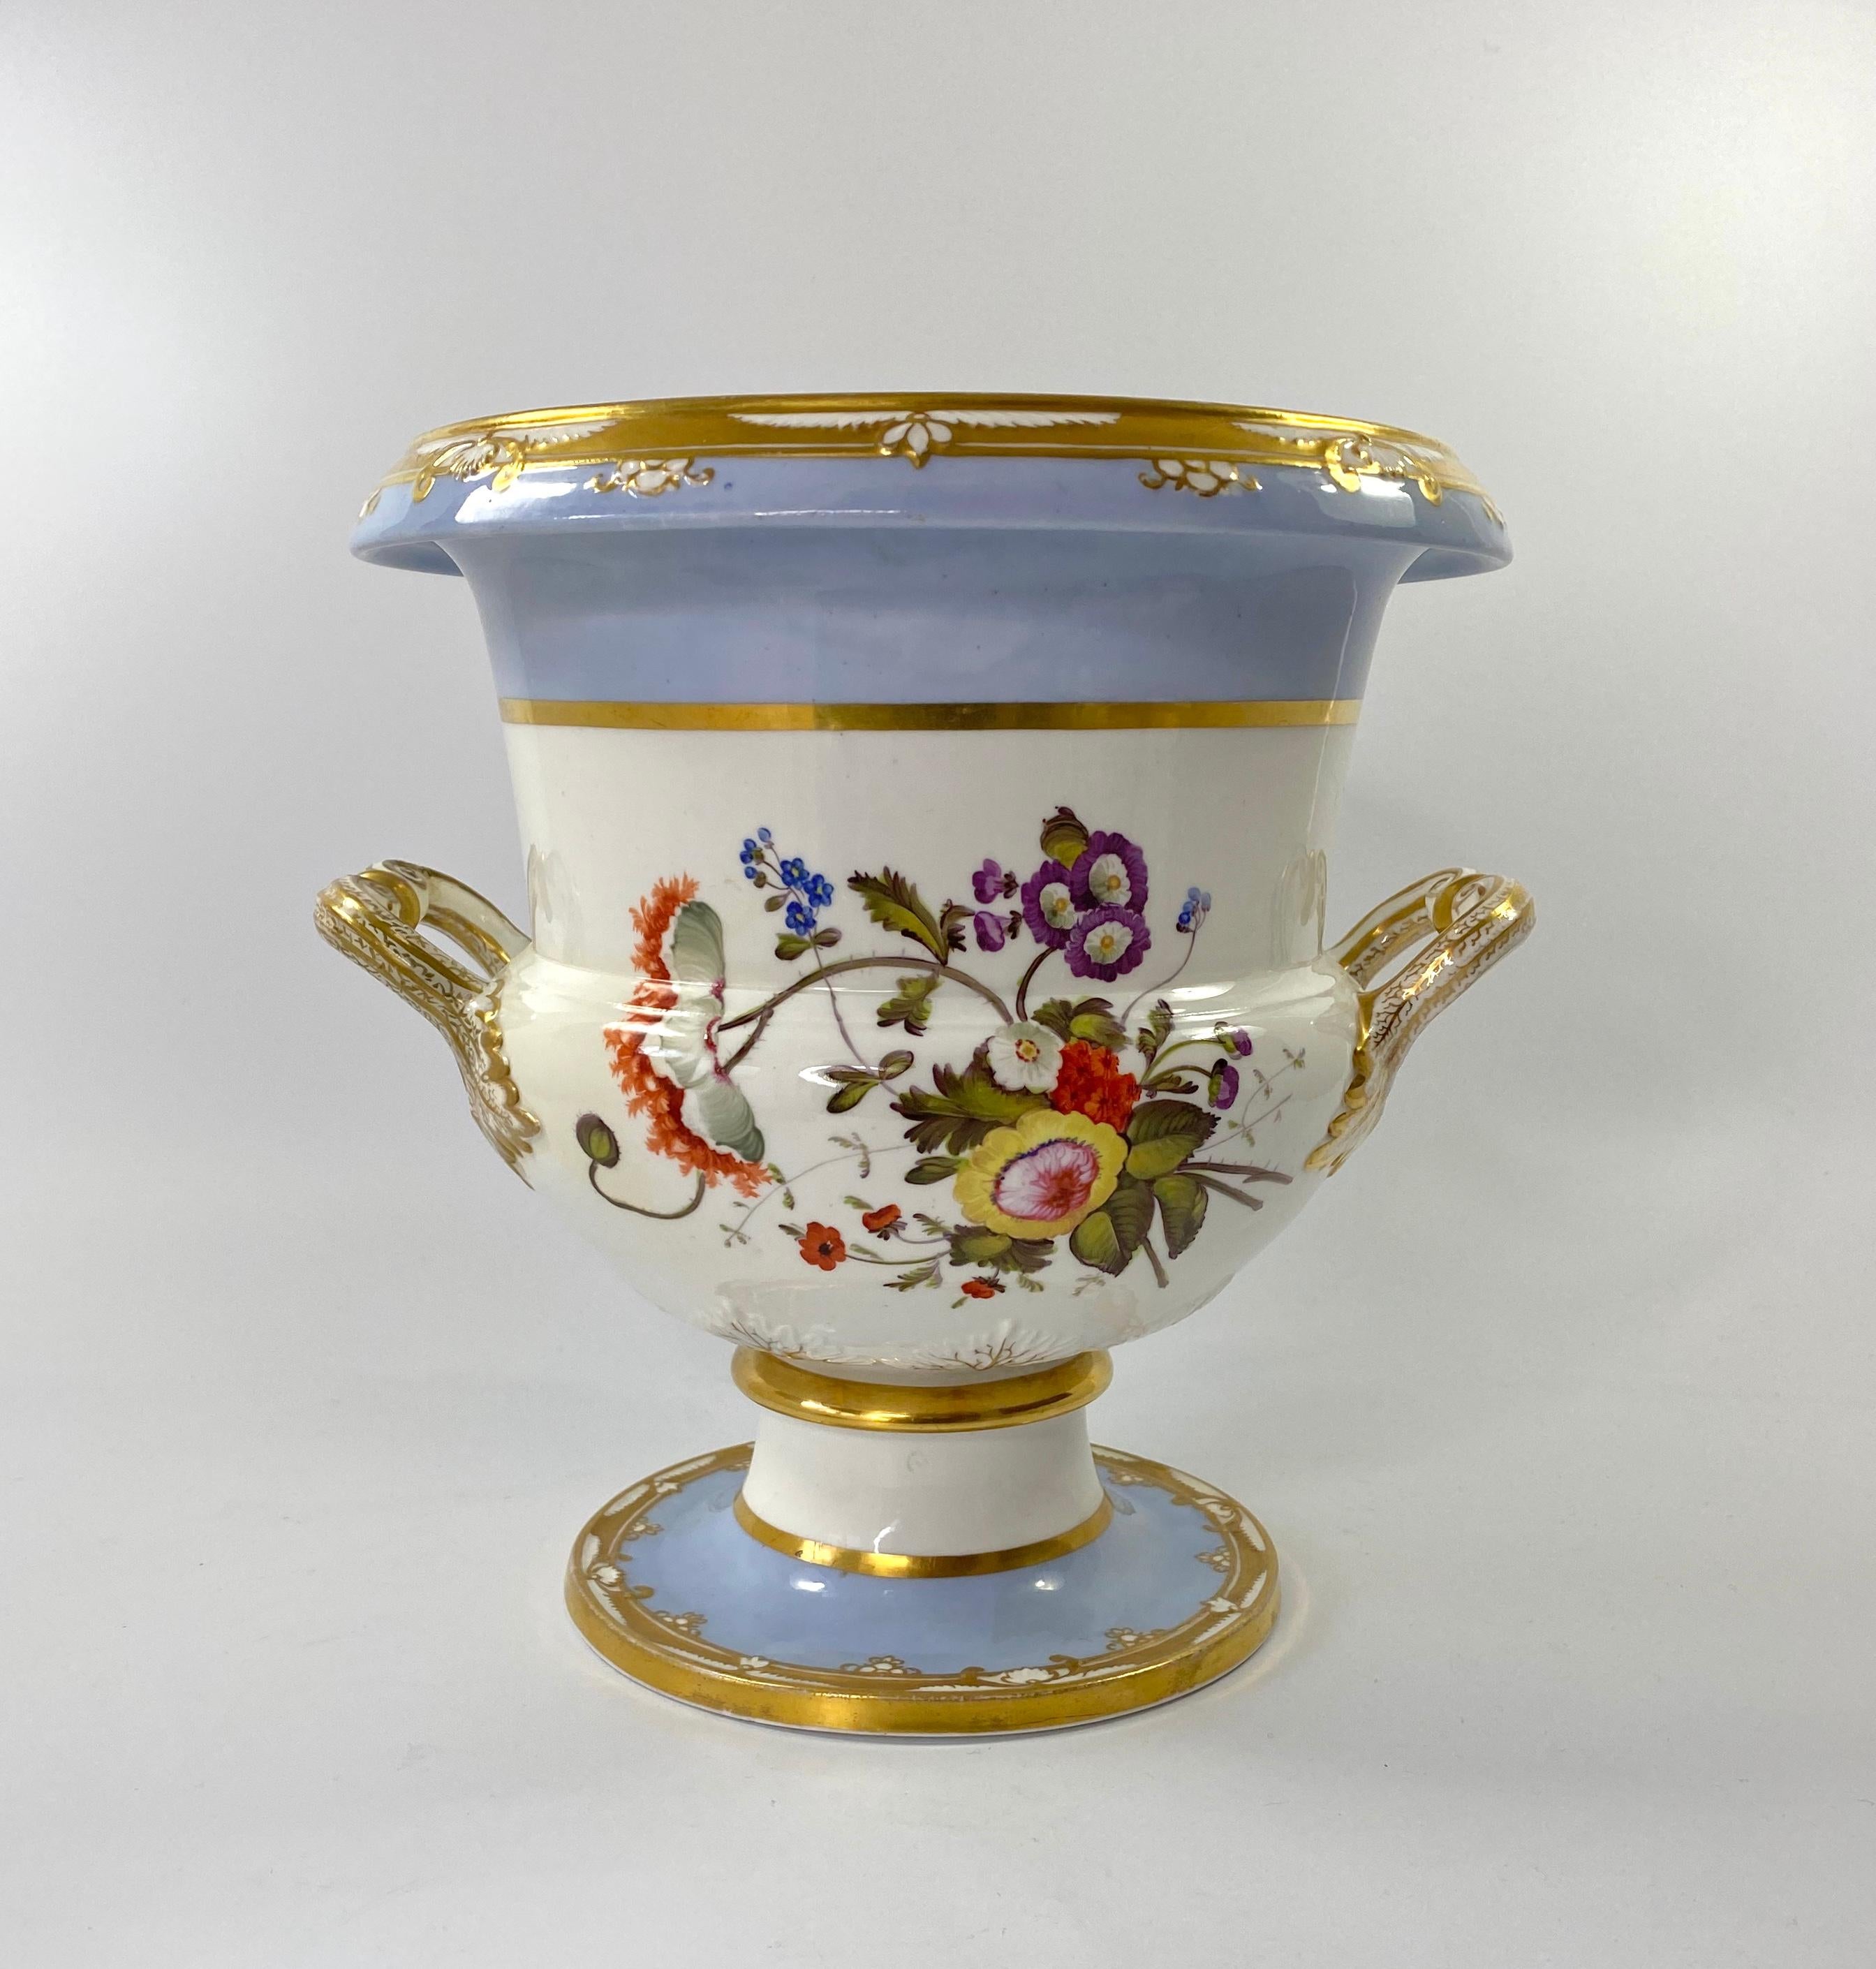 Pair of large Spode porcelain ice pails, c. 1820. The campana shaped vases, painted with large sprays of flowers, between lavender borders. Having elaborate twin branch handles, terminating in leaves, and heightened in gilt.
Both pails lack their